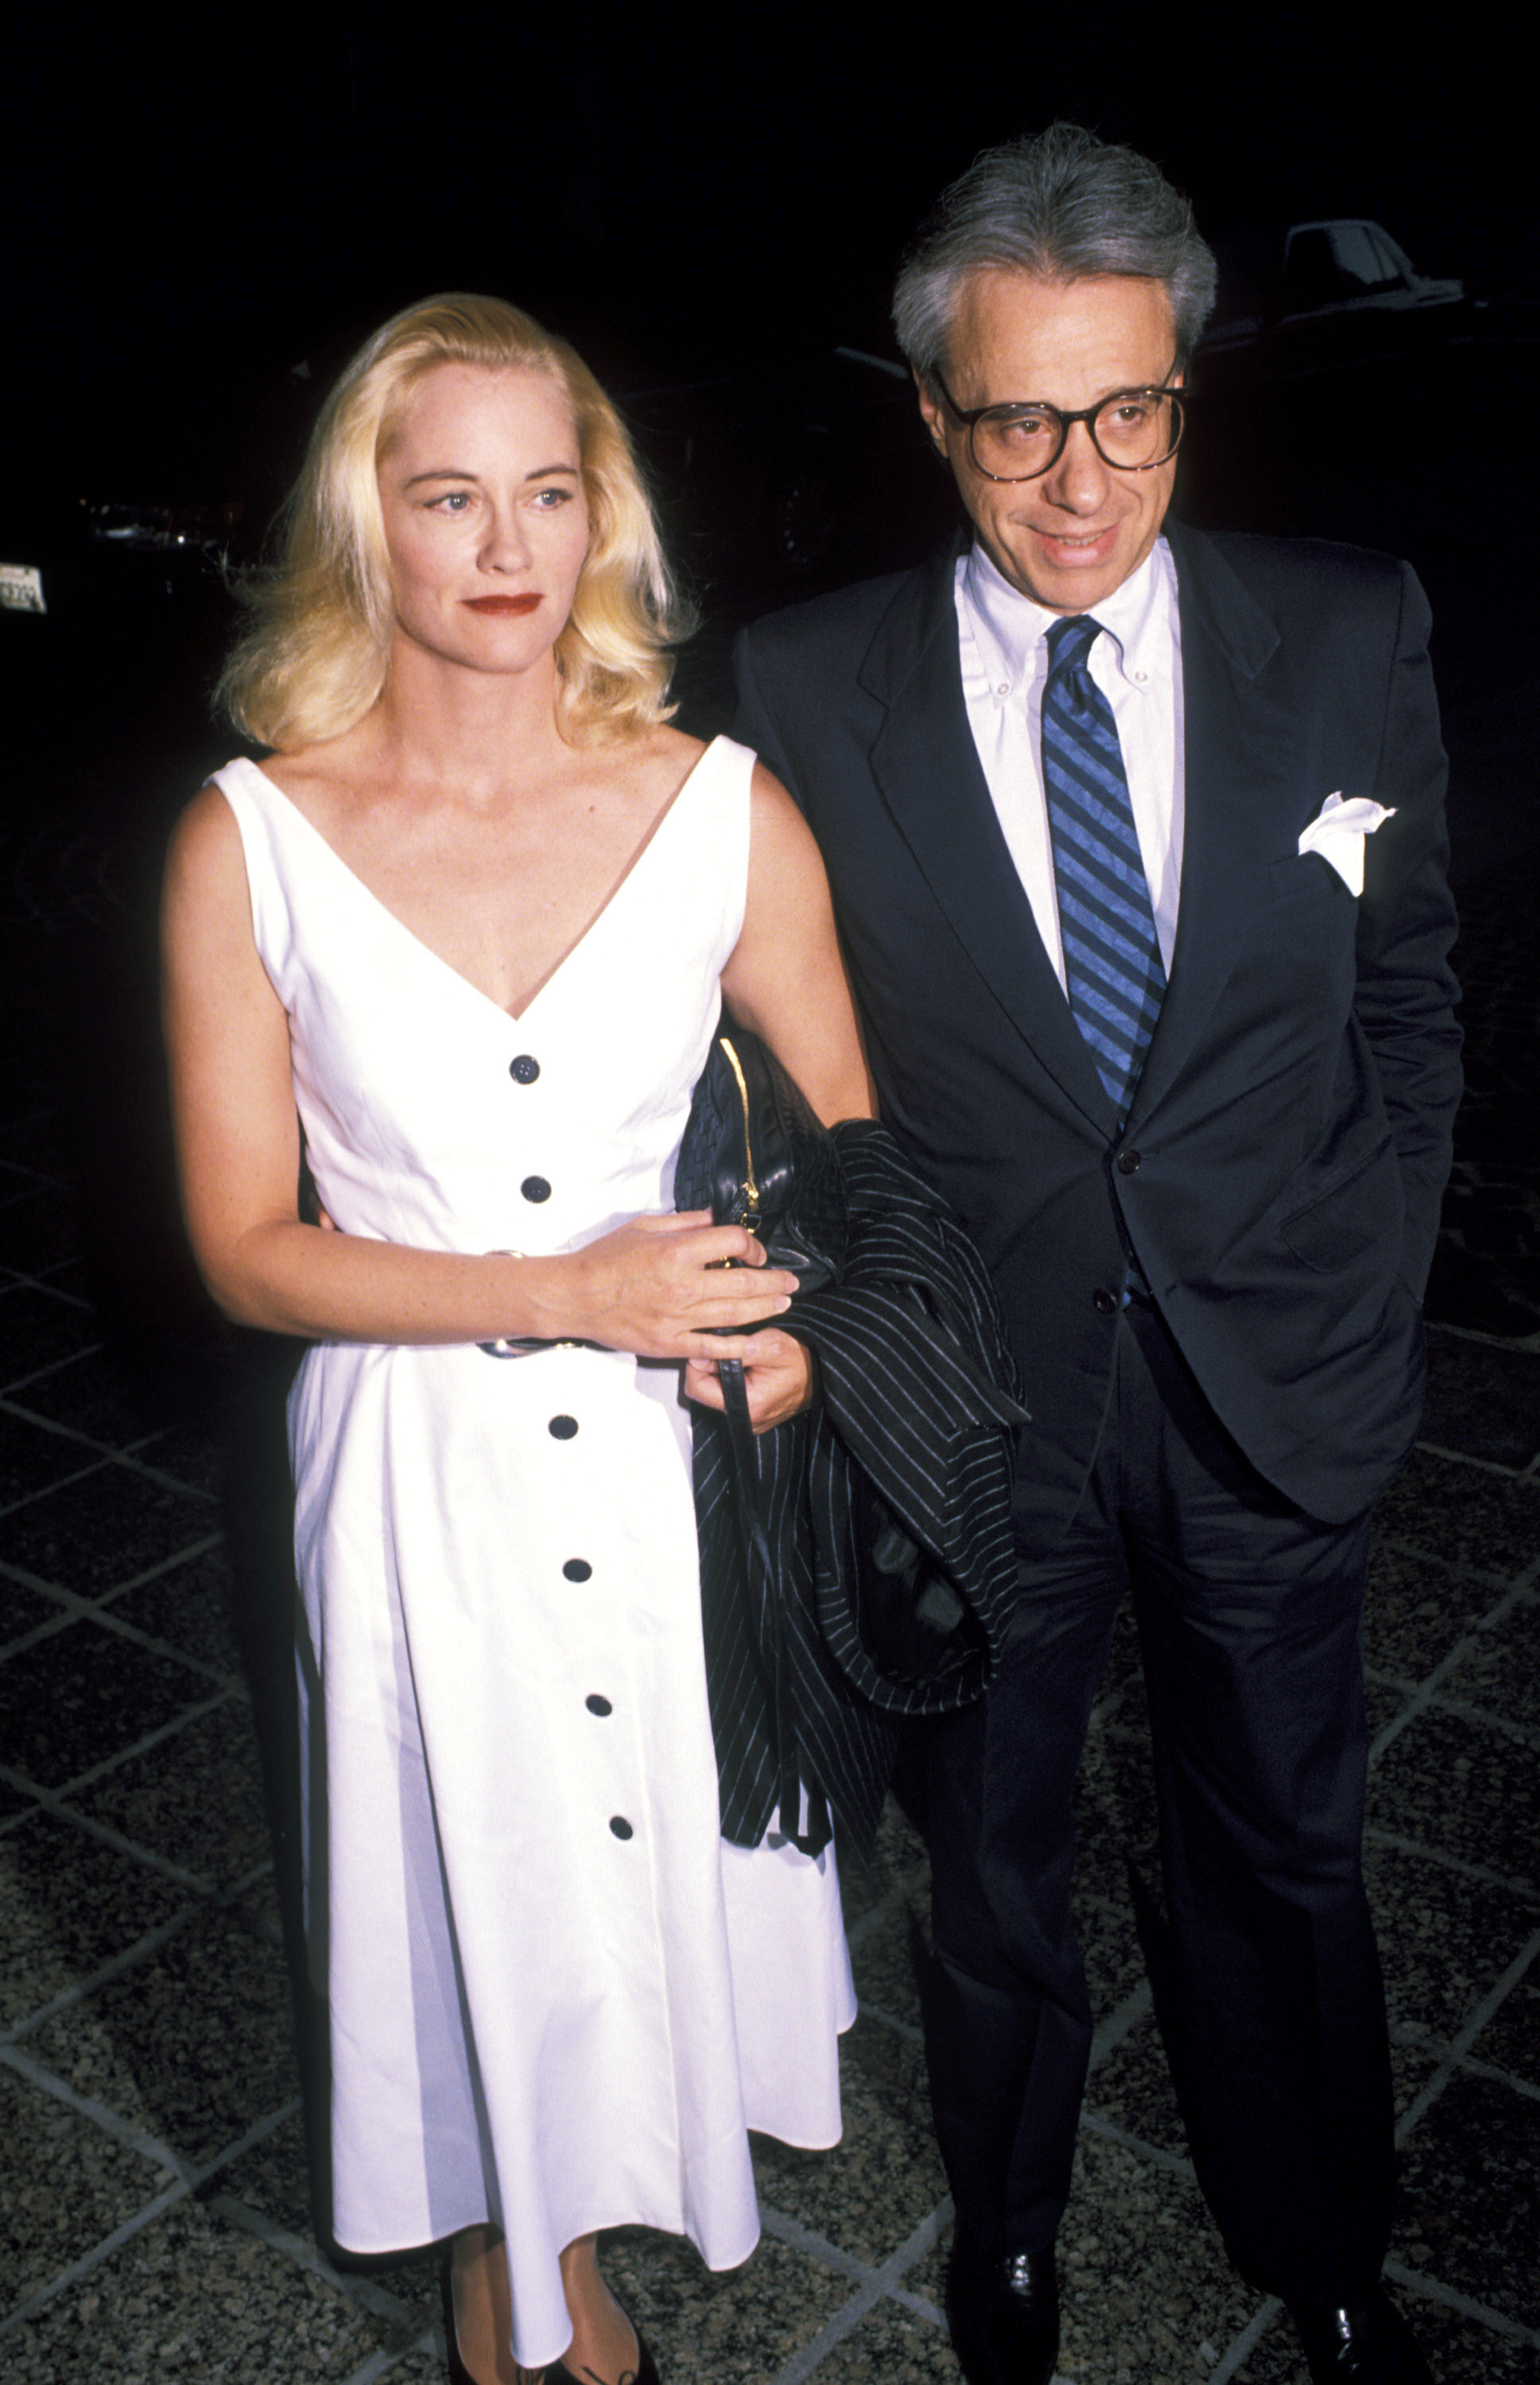 Cybill Shepherd and Peter Bogdanovich in 1992 in New York City, New York. | Source: Getty Images